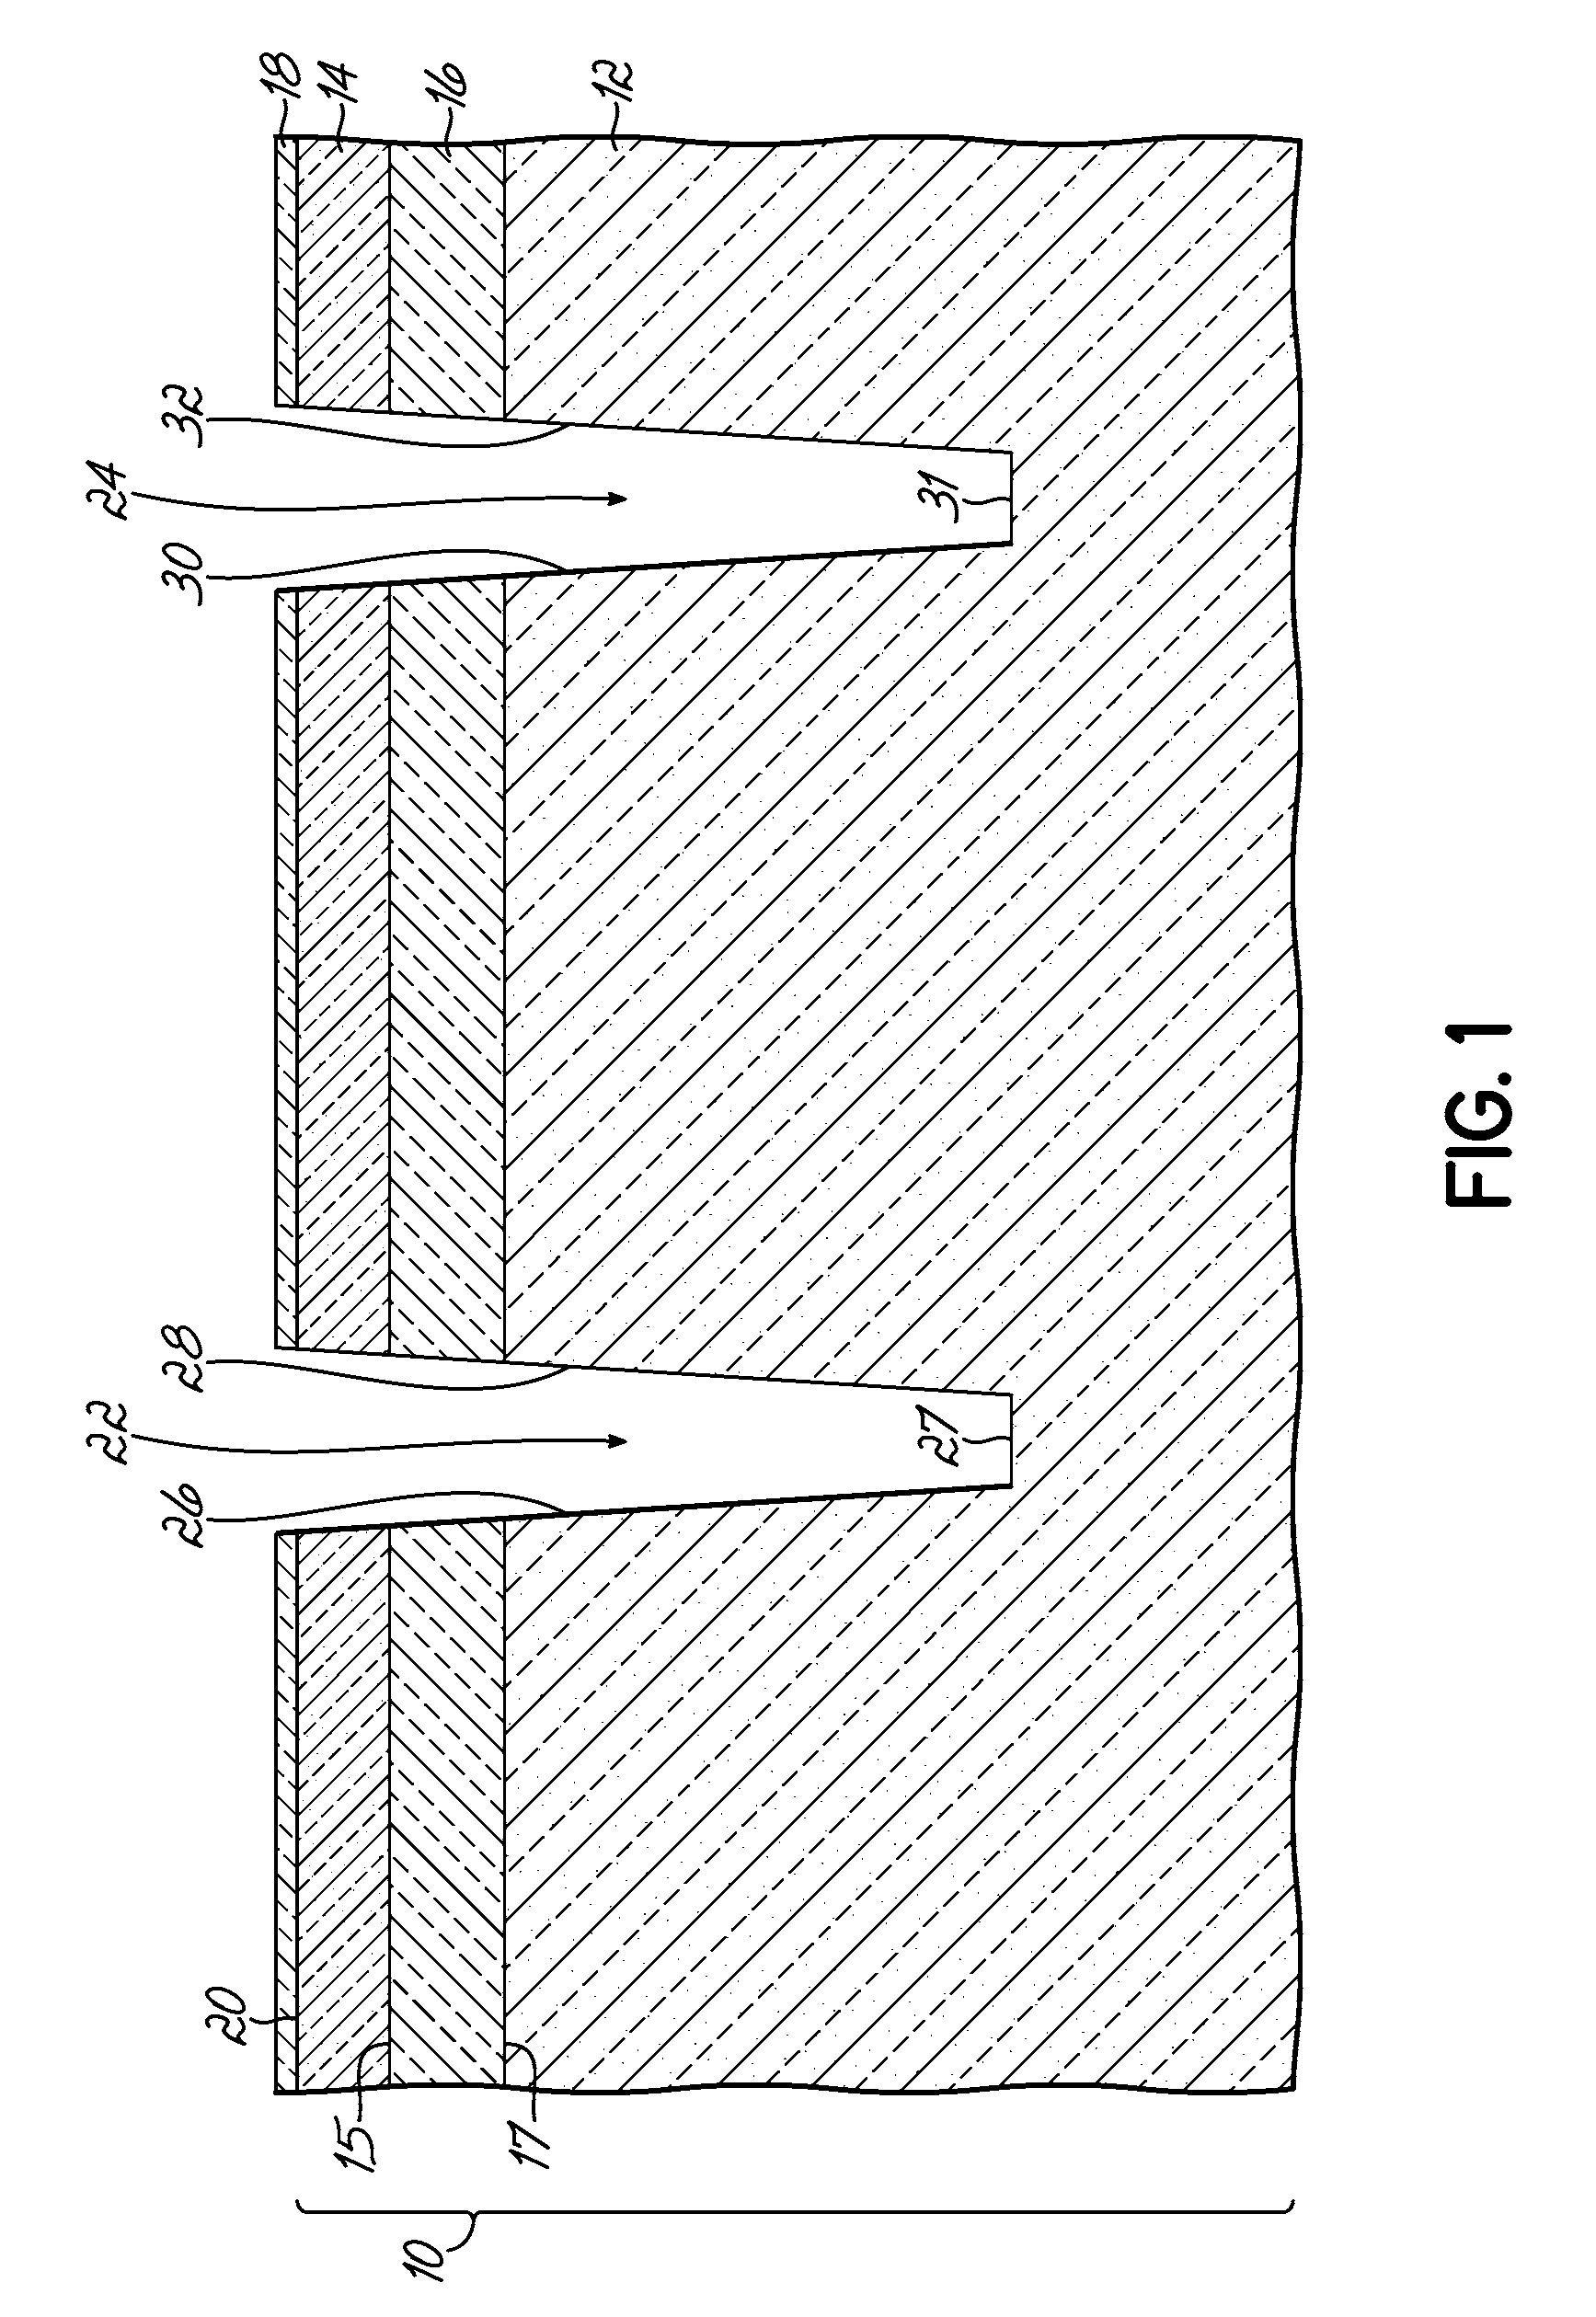 Trench generated device structures and design structures for radiofrequency and bicmos integrated circuits